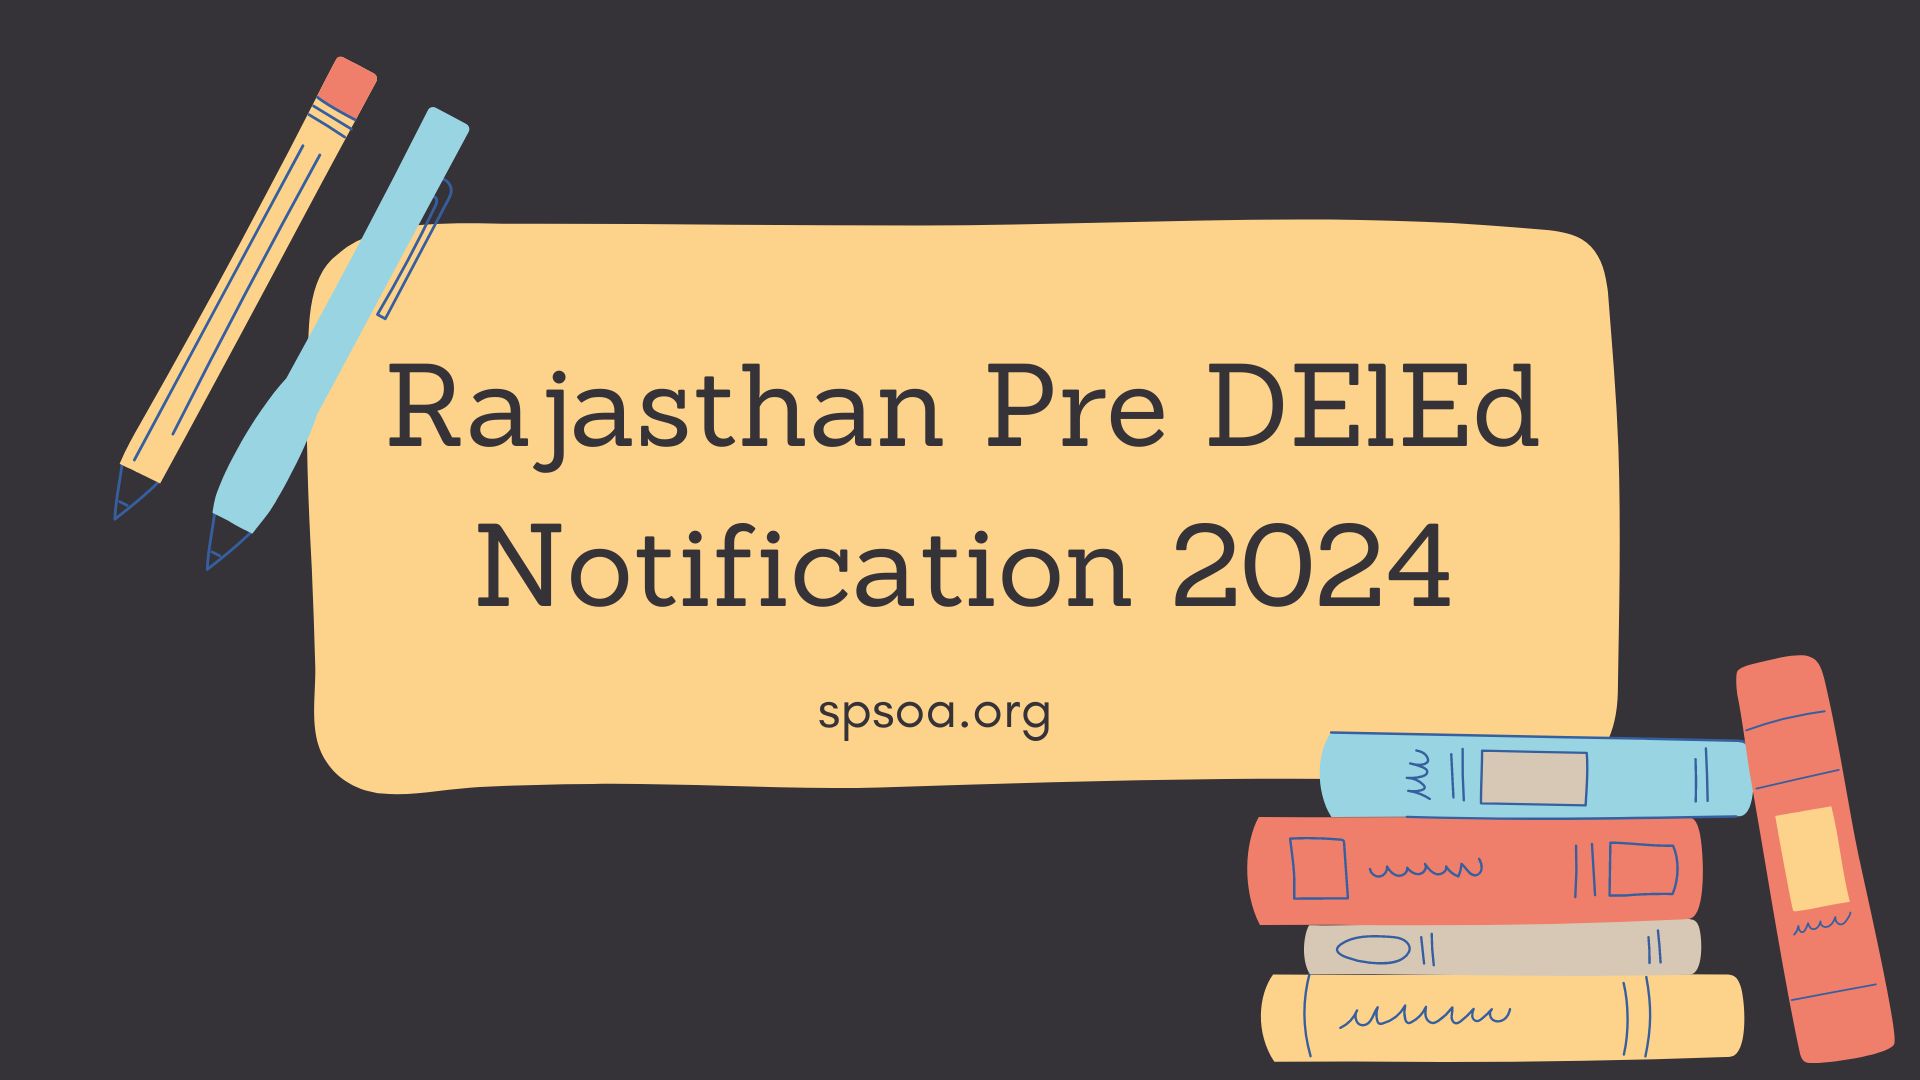 Rajasthan Pre DElEd Notification 2024